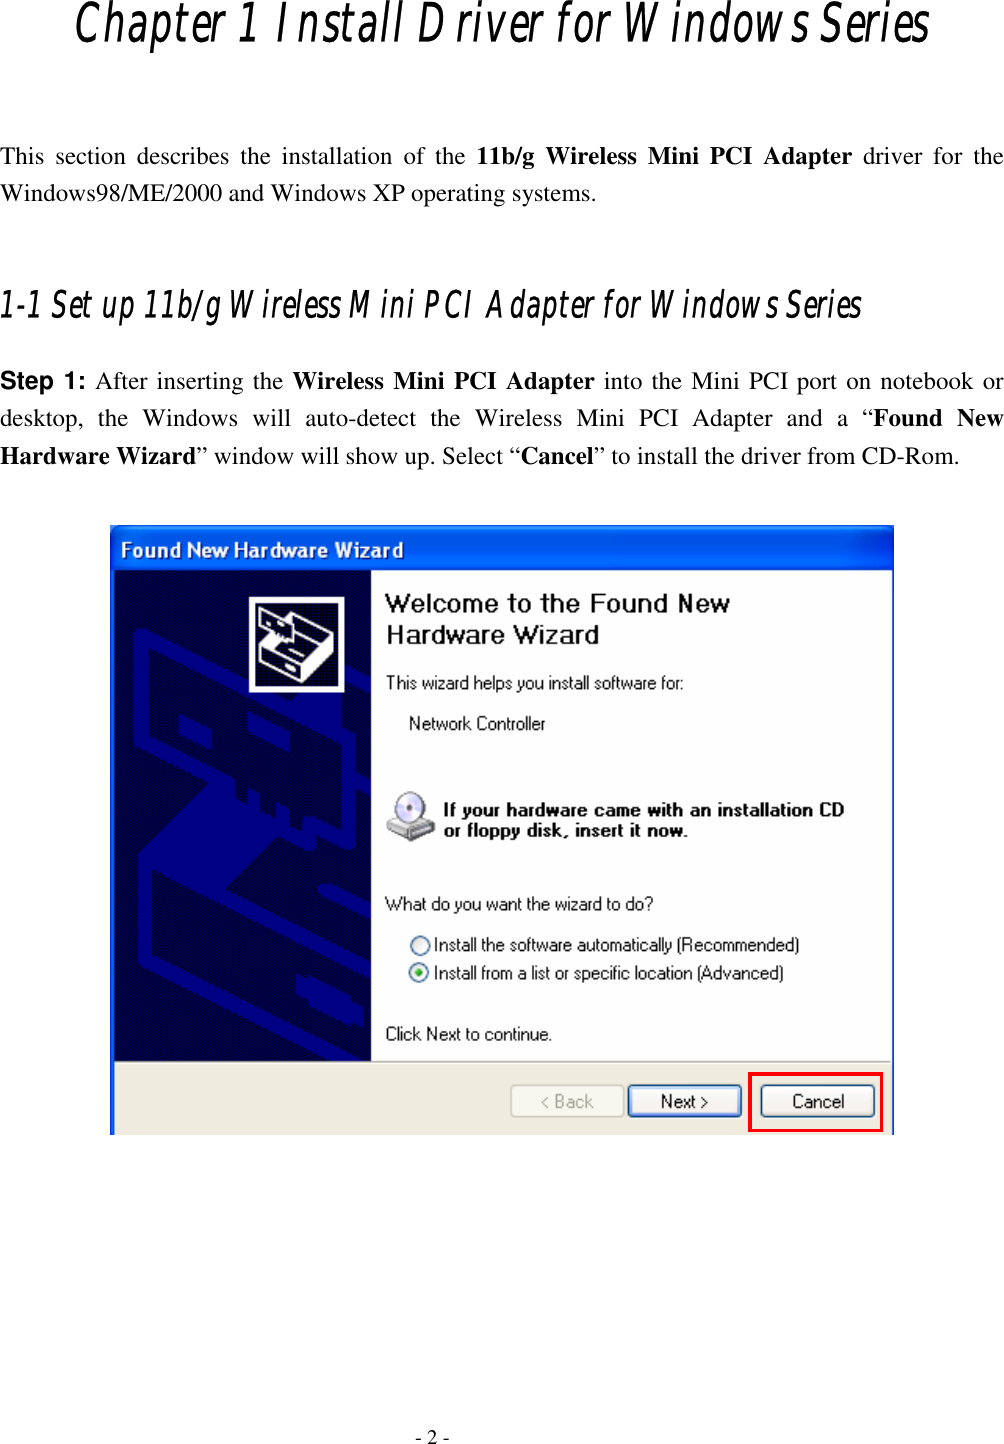    - 2 - Chapter 1 Install Driver for Windows Series  This section describes the installation of the 11b/g Wireless Mini PCI Adapter driver for the Windows98/ME/2000 and Windows XP operating systems.  1-1 Set up 11b/g Wireless Mini PCI Adapter for Windows Series Step 1: After inserting the Wireless Mini PCI Adapter into the Mini PCI port on notebook or desktop, the Windows will auto-detect the Wireless Mini PCI Adapter and a “Found New Hardware Wizard” window will show up. Select “Cancel” to install the driver from CD-Rom.         